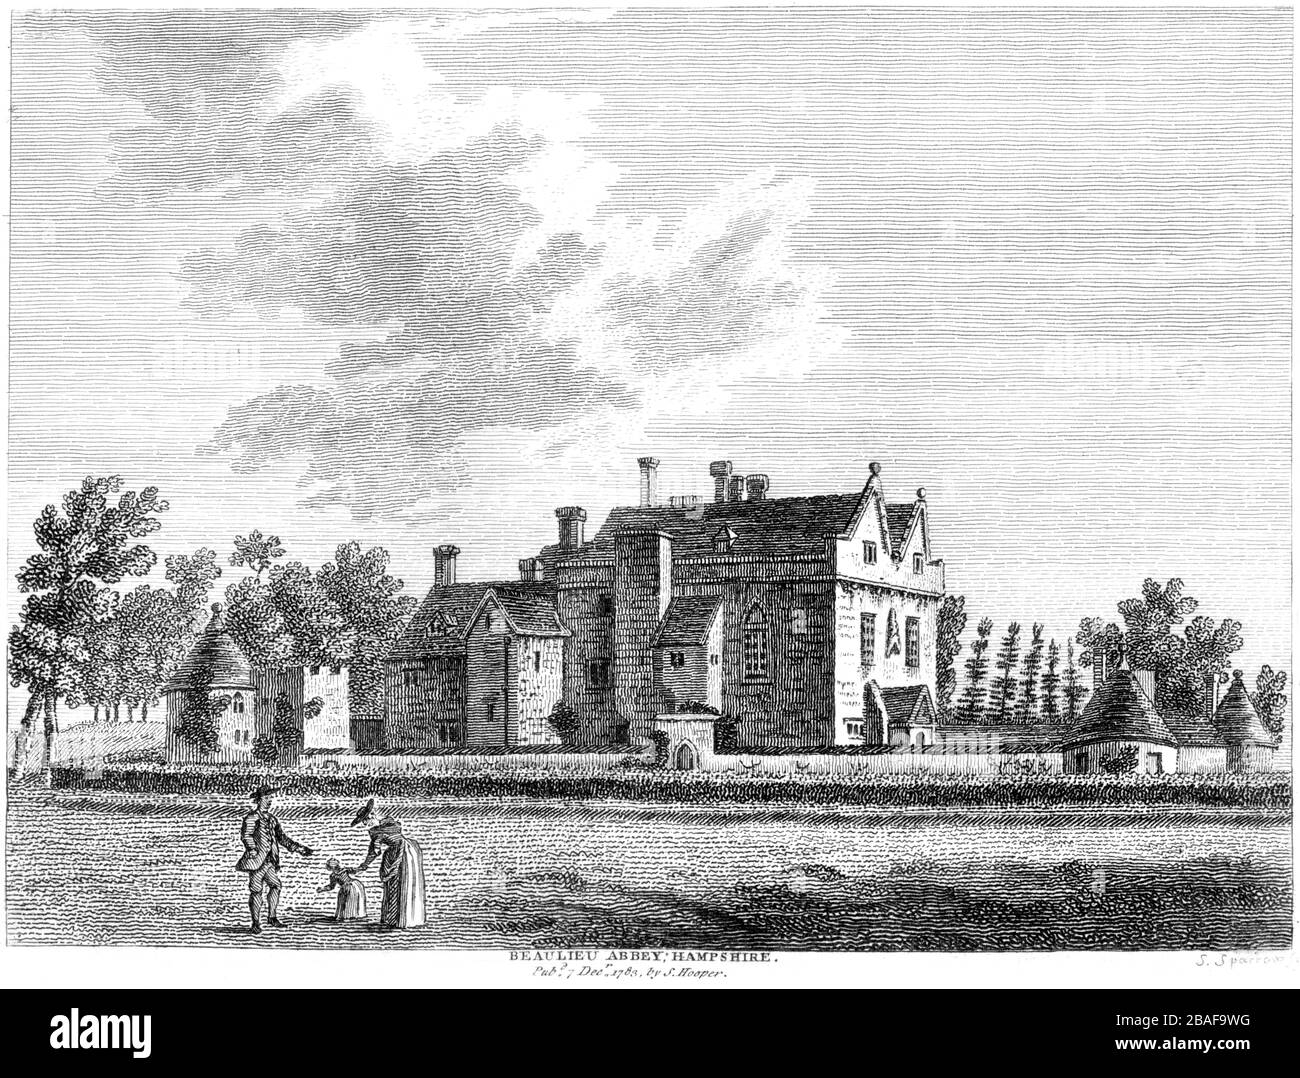 Engraving of Beaulieu Abbey Hampshire 1783 scanned at high res from a book published around 1786. This image is believed to be free of all copyright. Stock Photo